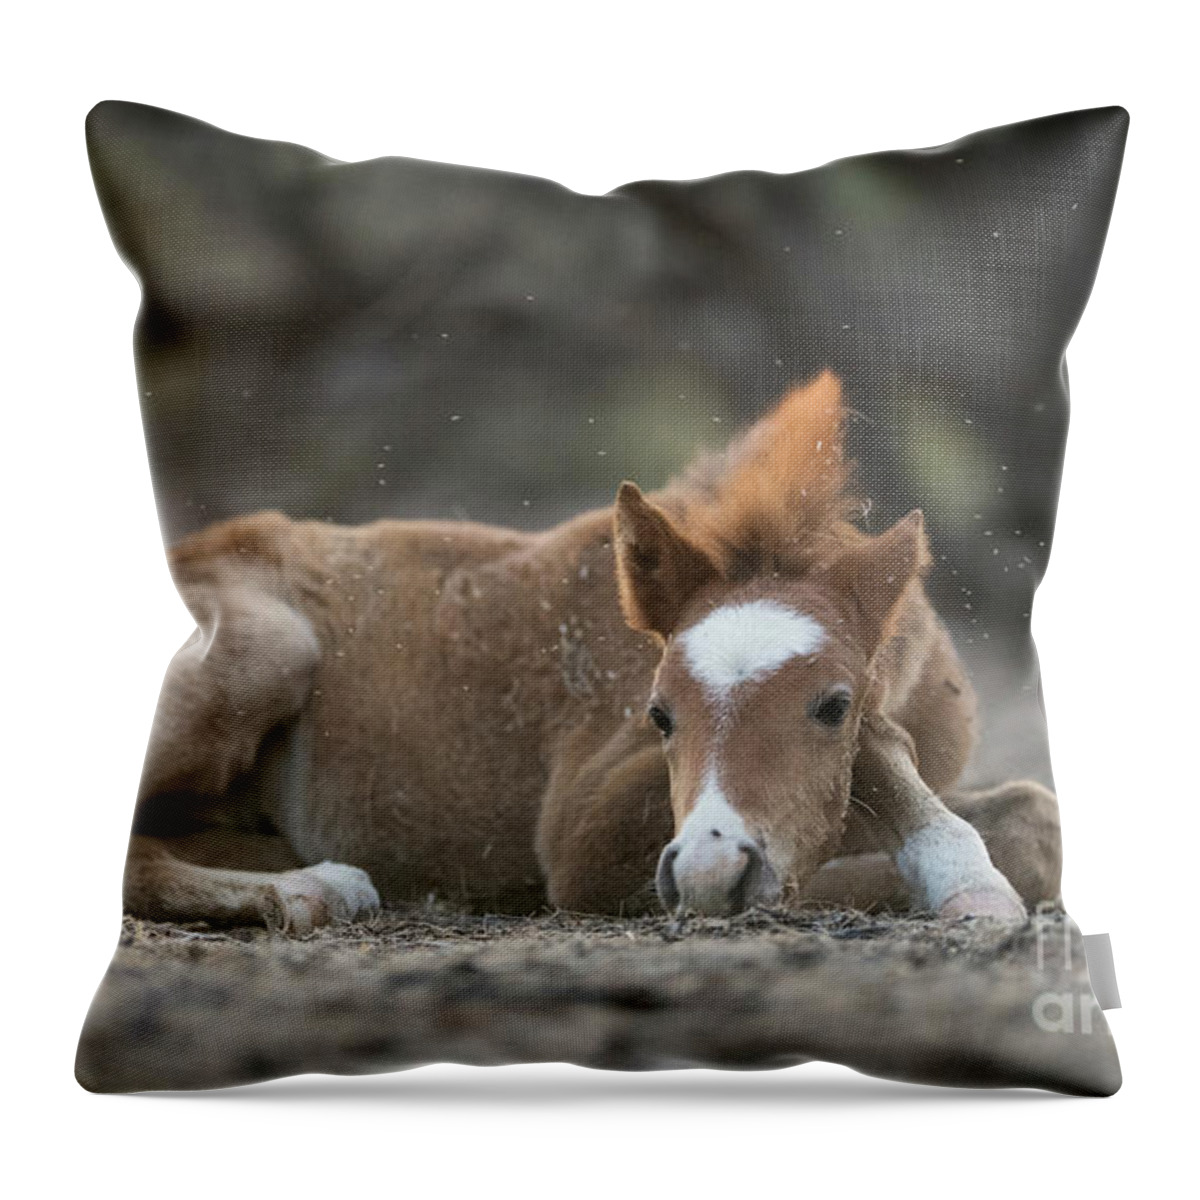 Cute Throw Pillow featuring the photograph Nap Time by Shannon Hastings